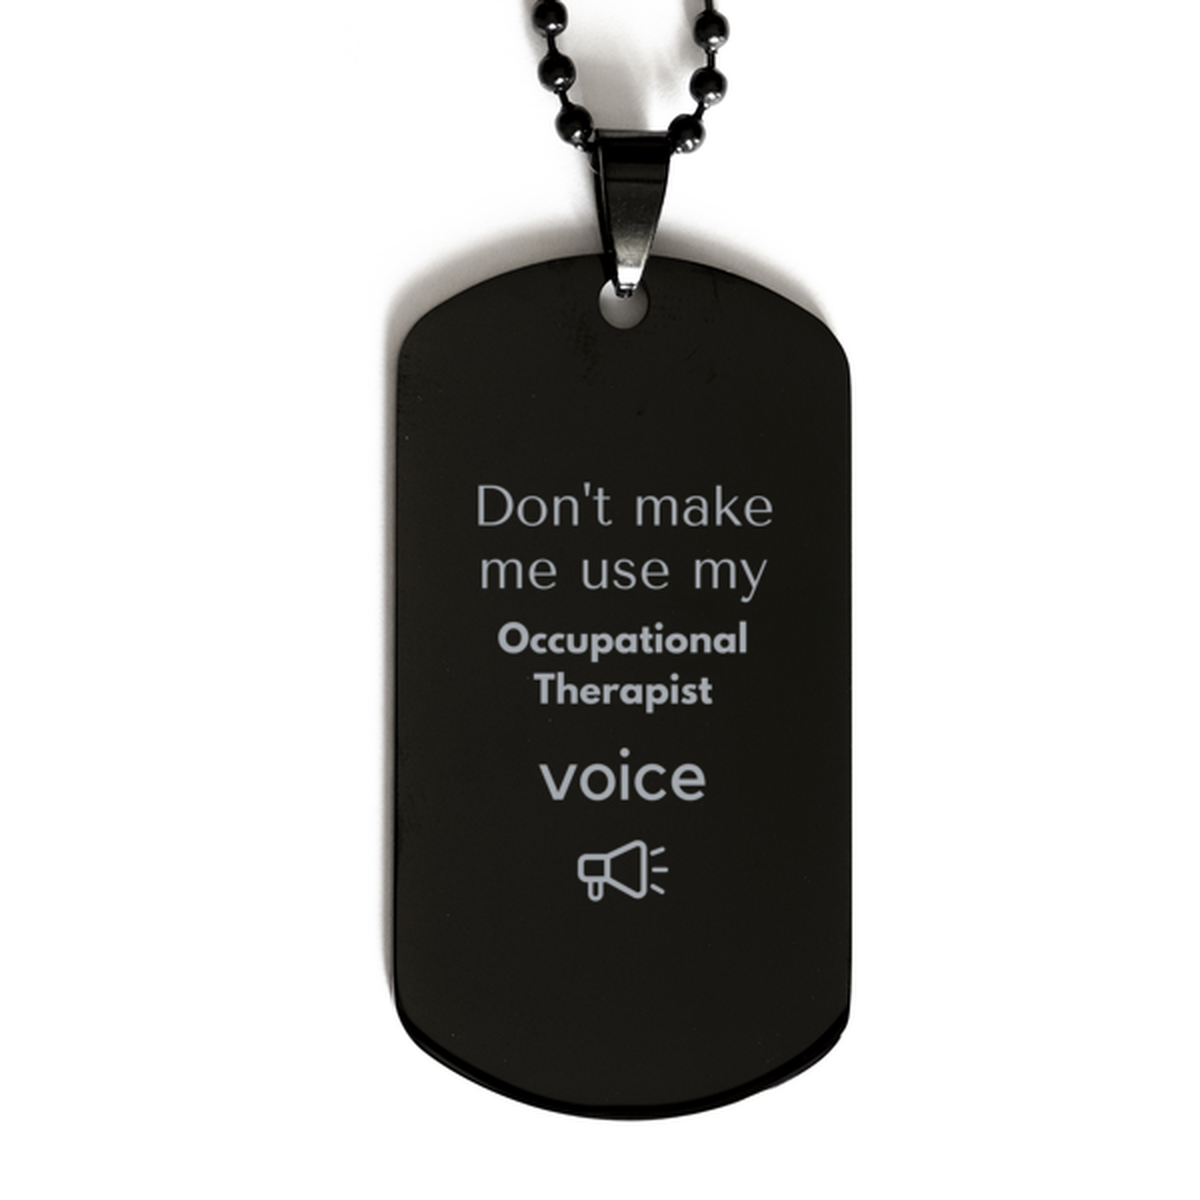 Don't make me use my Occupational Therapist voice, Sarcasm Occupational Therapist Gifts, Christmas Occupational Therapist Black Dog Tag Birthday Unique Gifts For Occupational Therapist Coworkers, Men, Women, Colleague, Friends